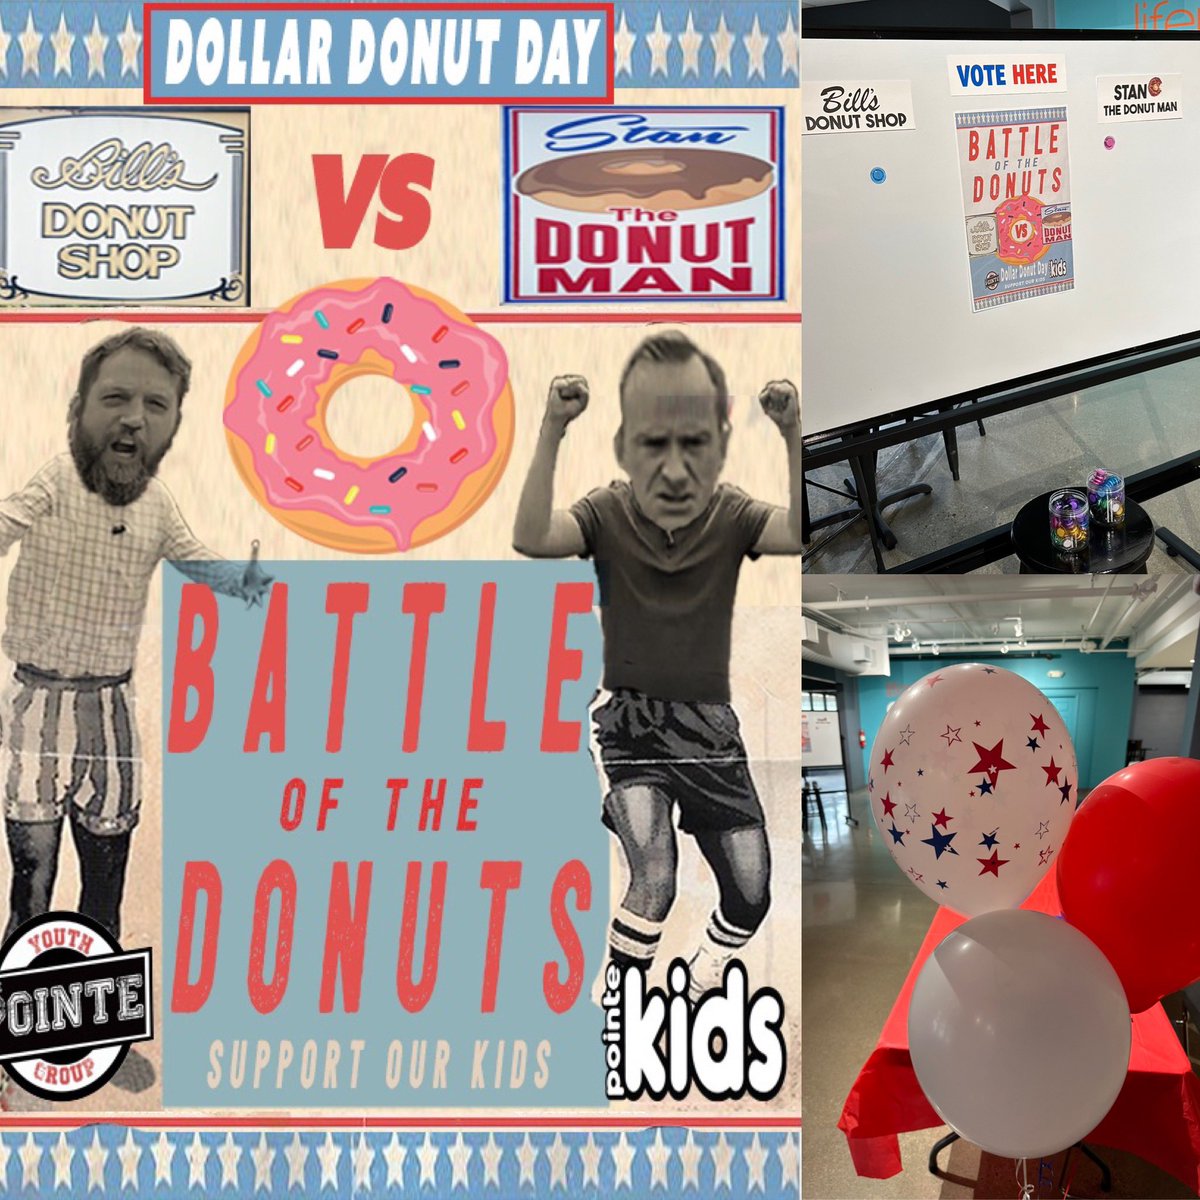 Tomorrow is the Battle of the Donuts! It’s a can’t miss Kid’s Fundraiser. Who ya got? Bill or Stan?! #donut #battle